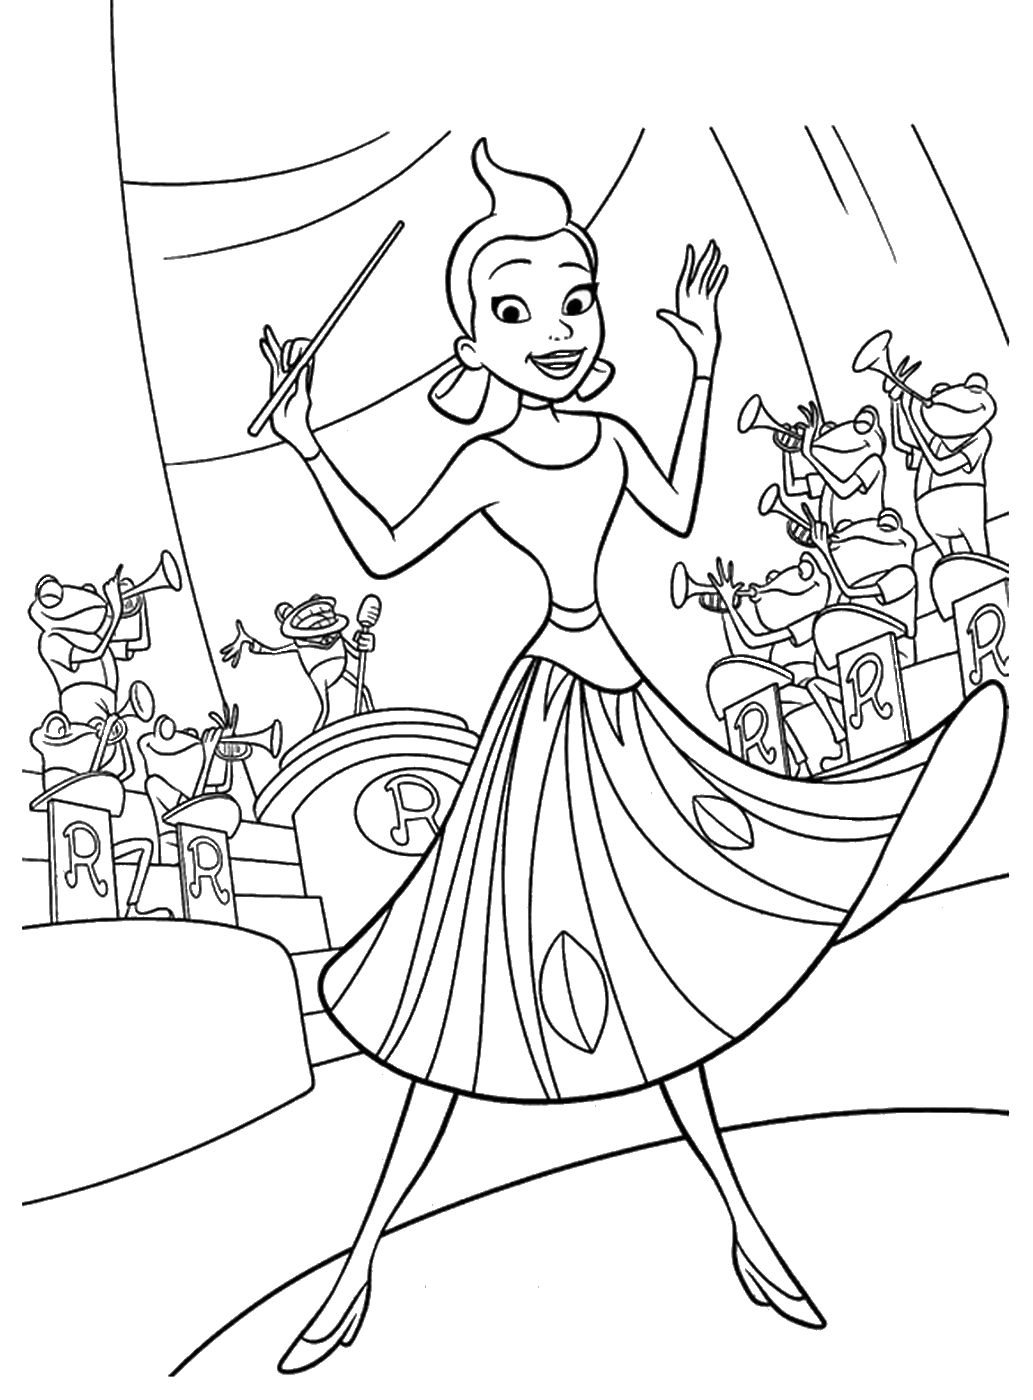 Meet the Robinsons Coloring Pages TV Film Printable 2020 04959 Coloring4free